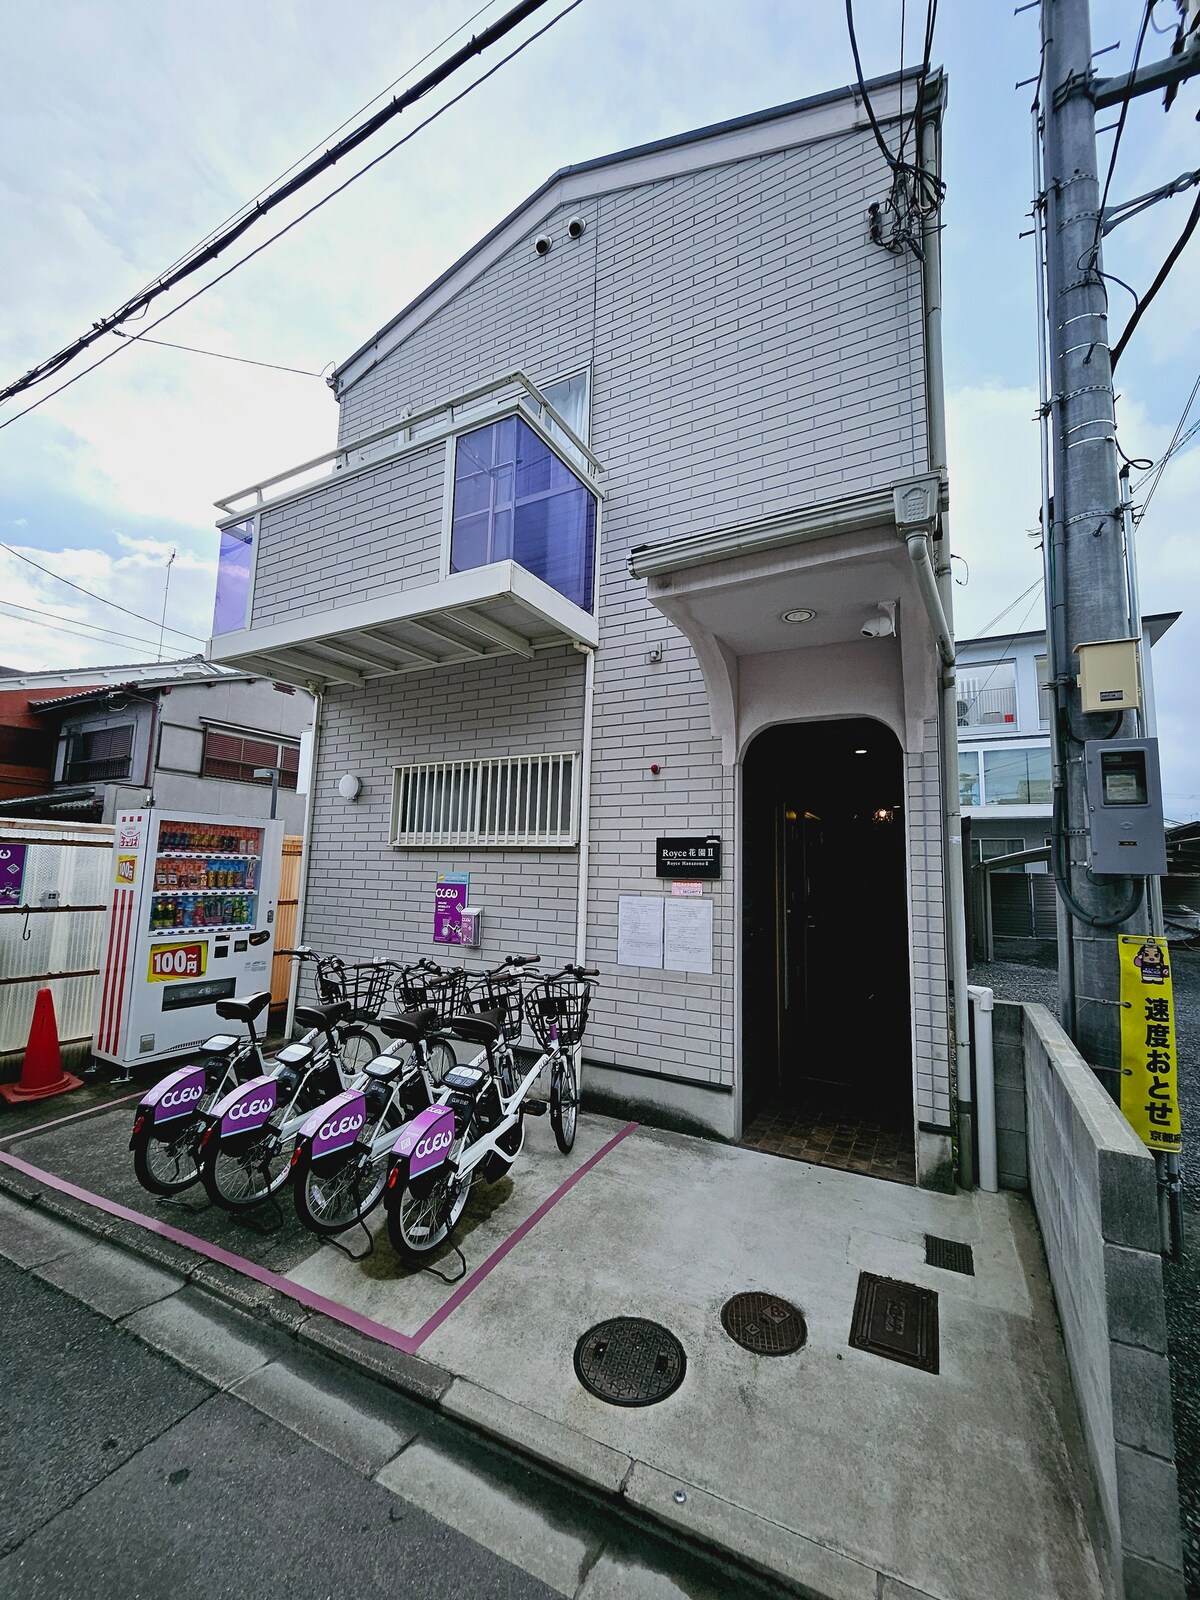 2F/花園駅450m/京都駅 嵯峨野線 12分/double bed,2 sofa bed,